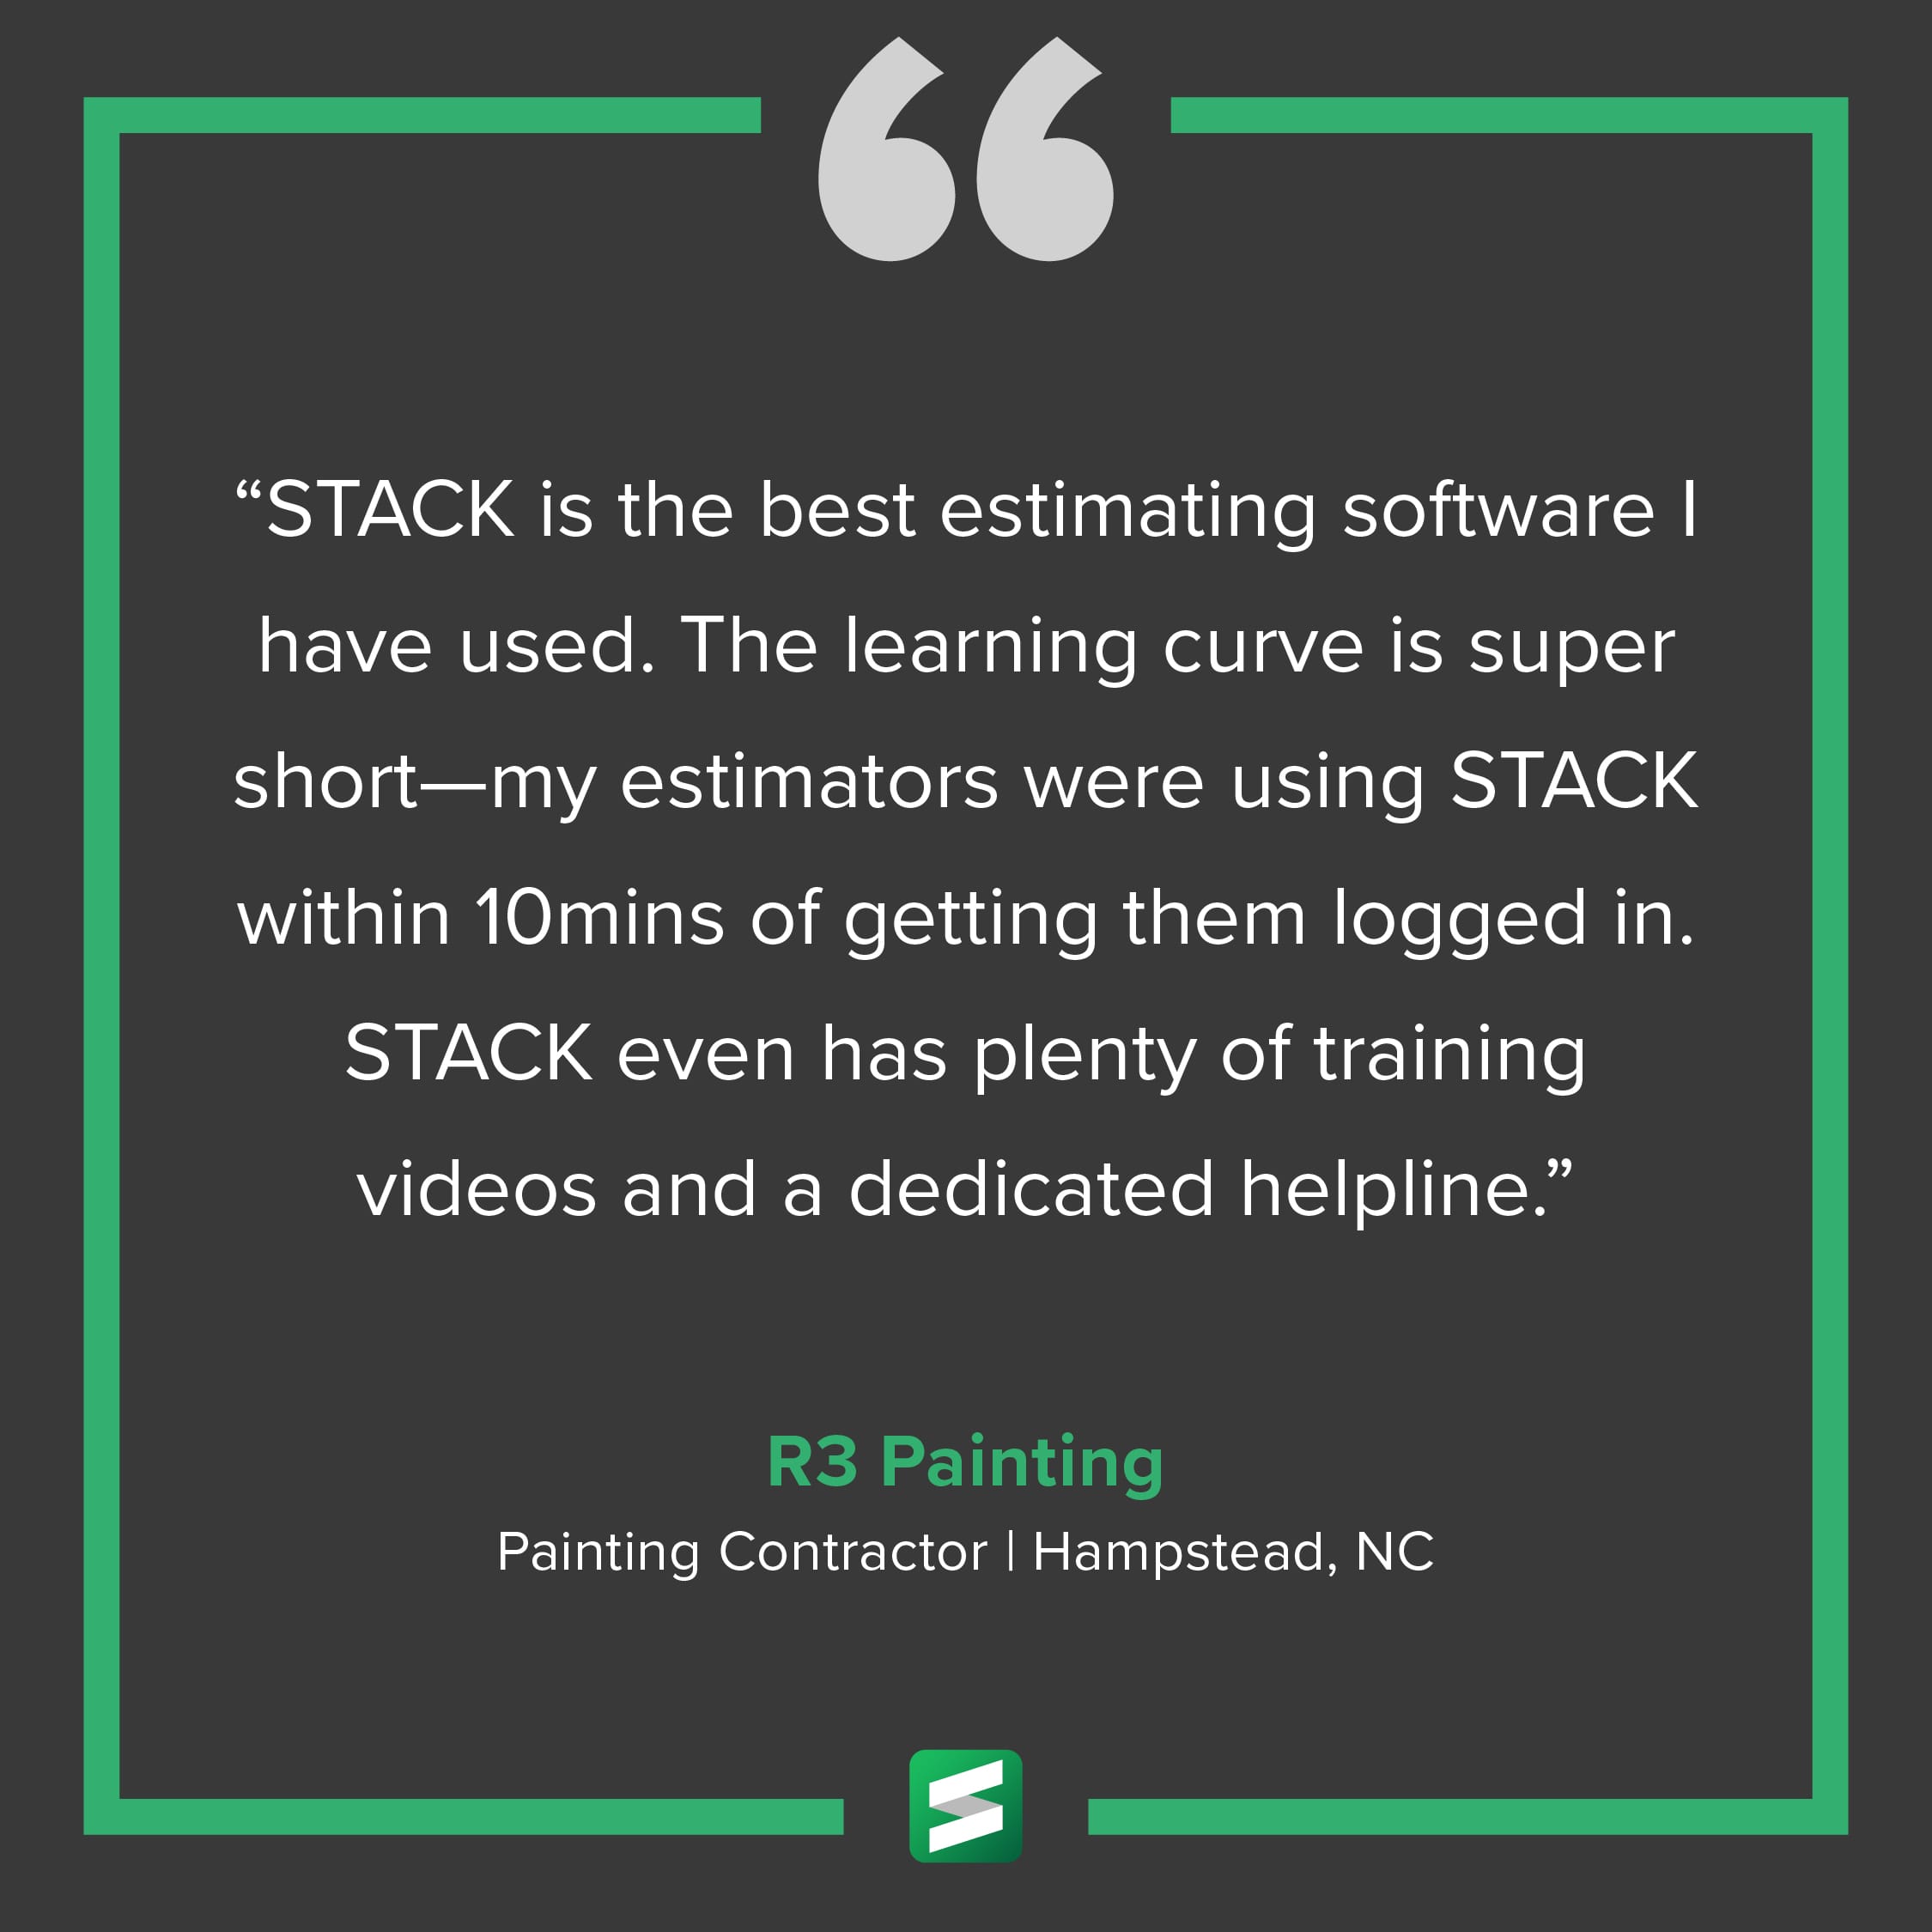 "STACK is the best estimating software I have used. The learning curve is super short—my estimators were using STACK within 10 mins of getting them logged in. STACK even has plenty of training videos and a dedicated helpline." – R3 Painting, Painting Contractor, Hampstead, NC